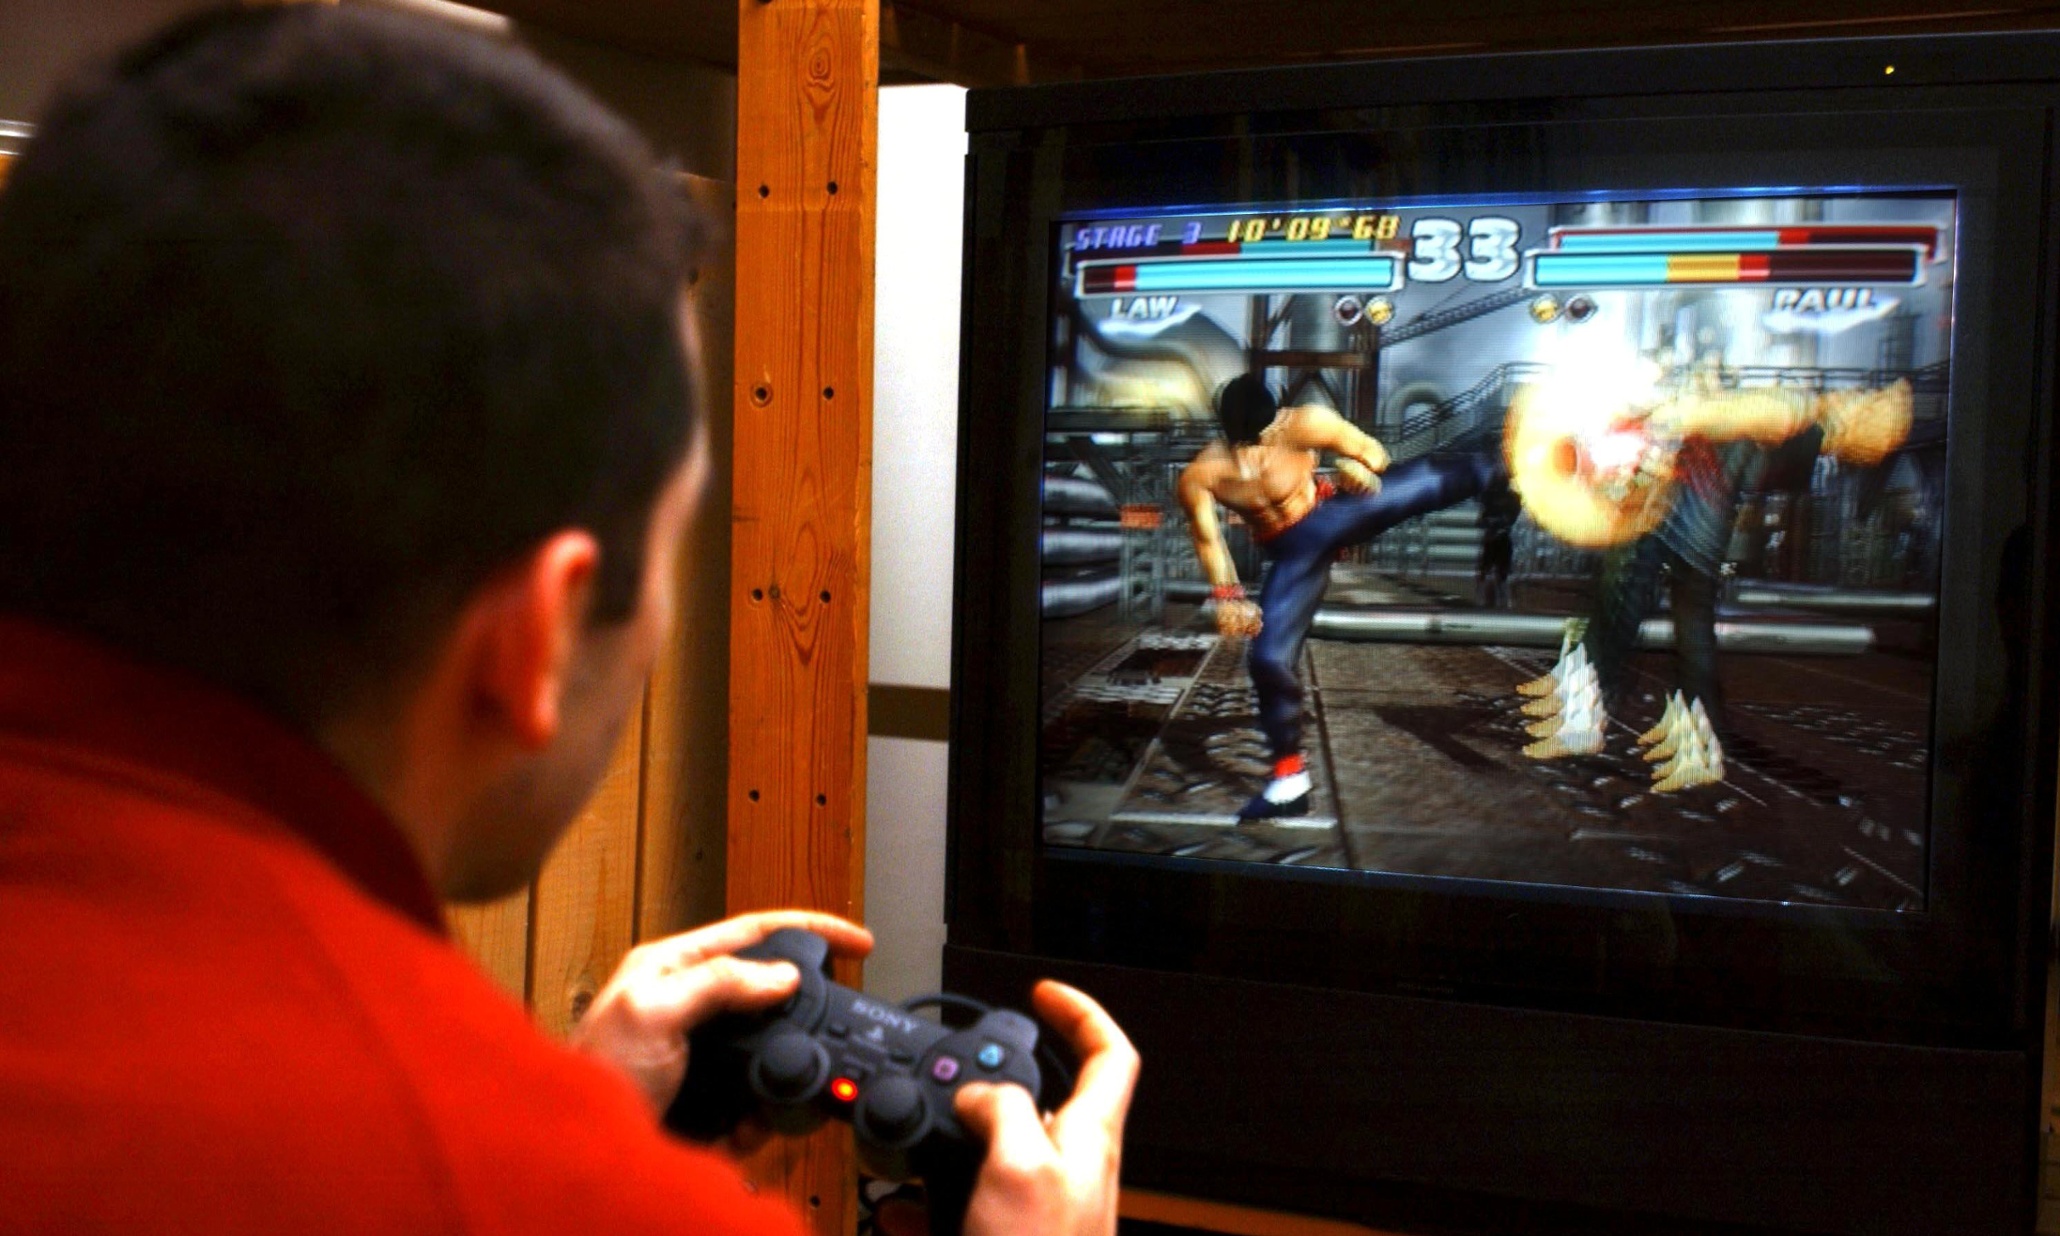 Video games are not making us more violent, study shows